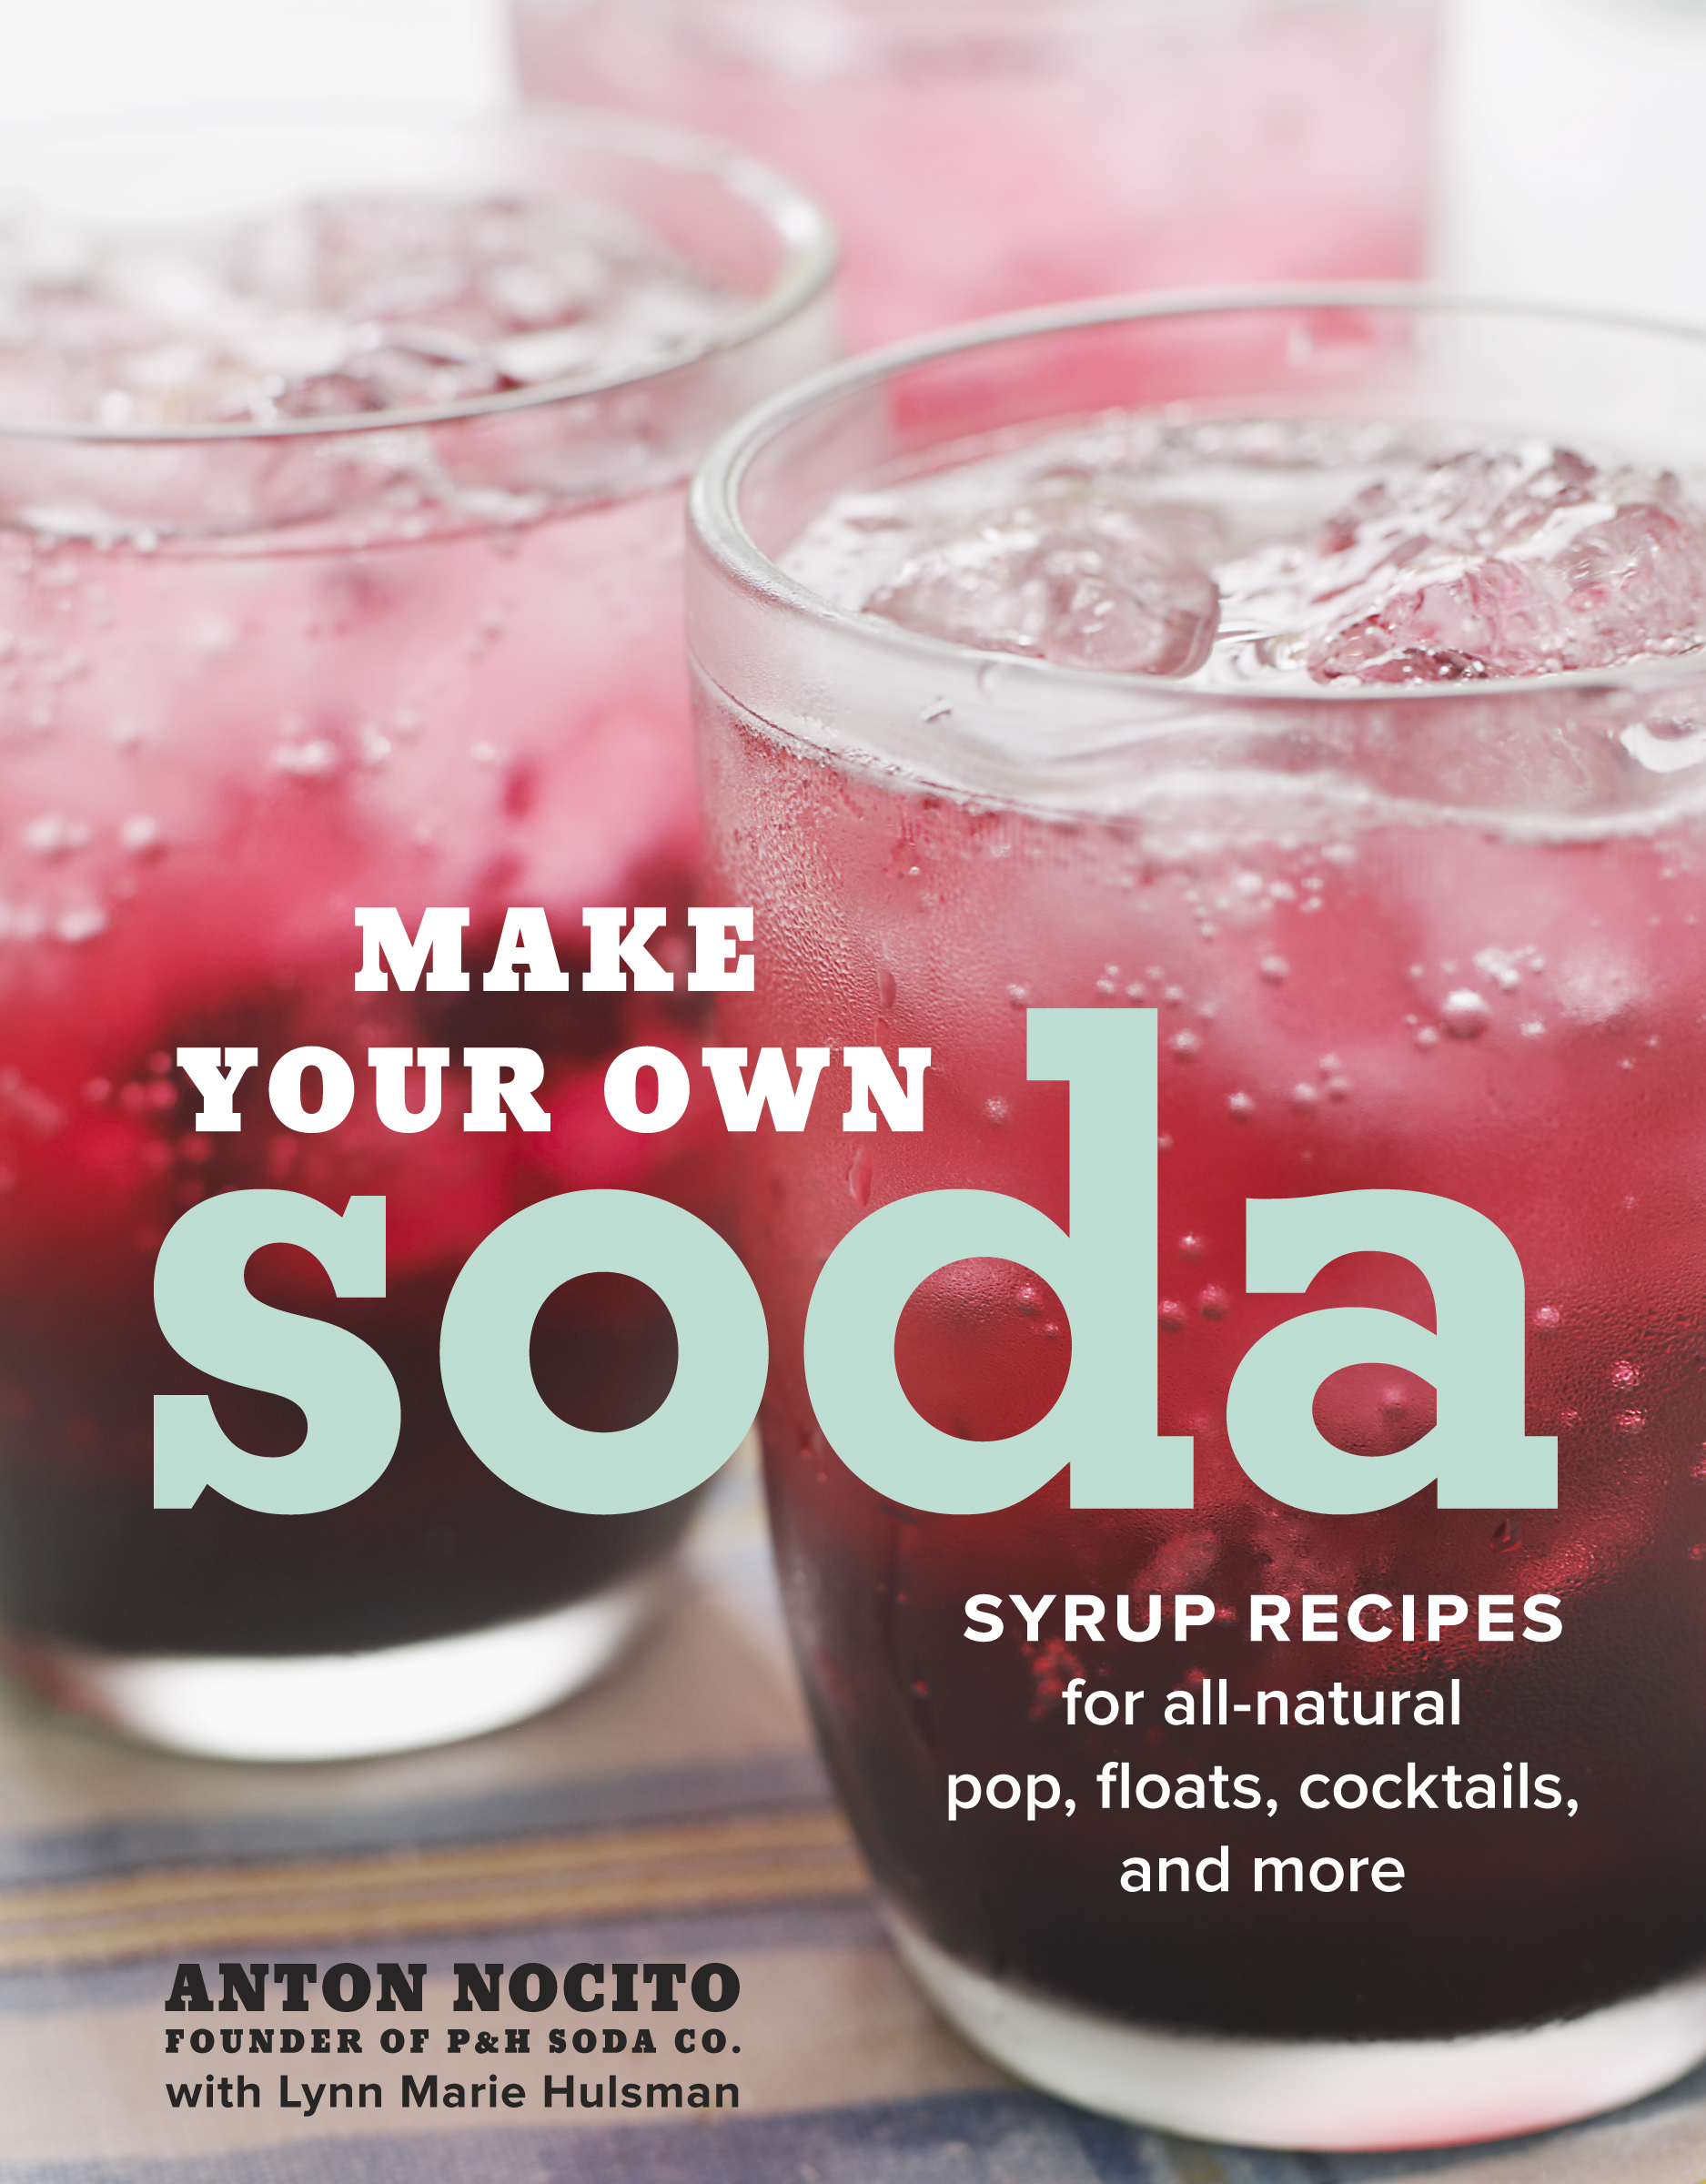 Book Launch: Make Your Own Soda by Anton Nocito